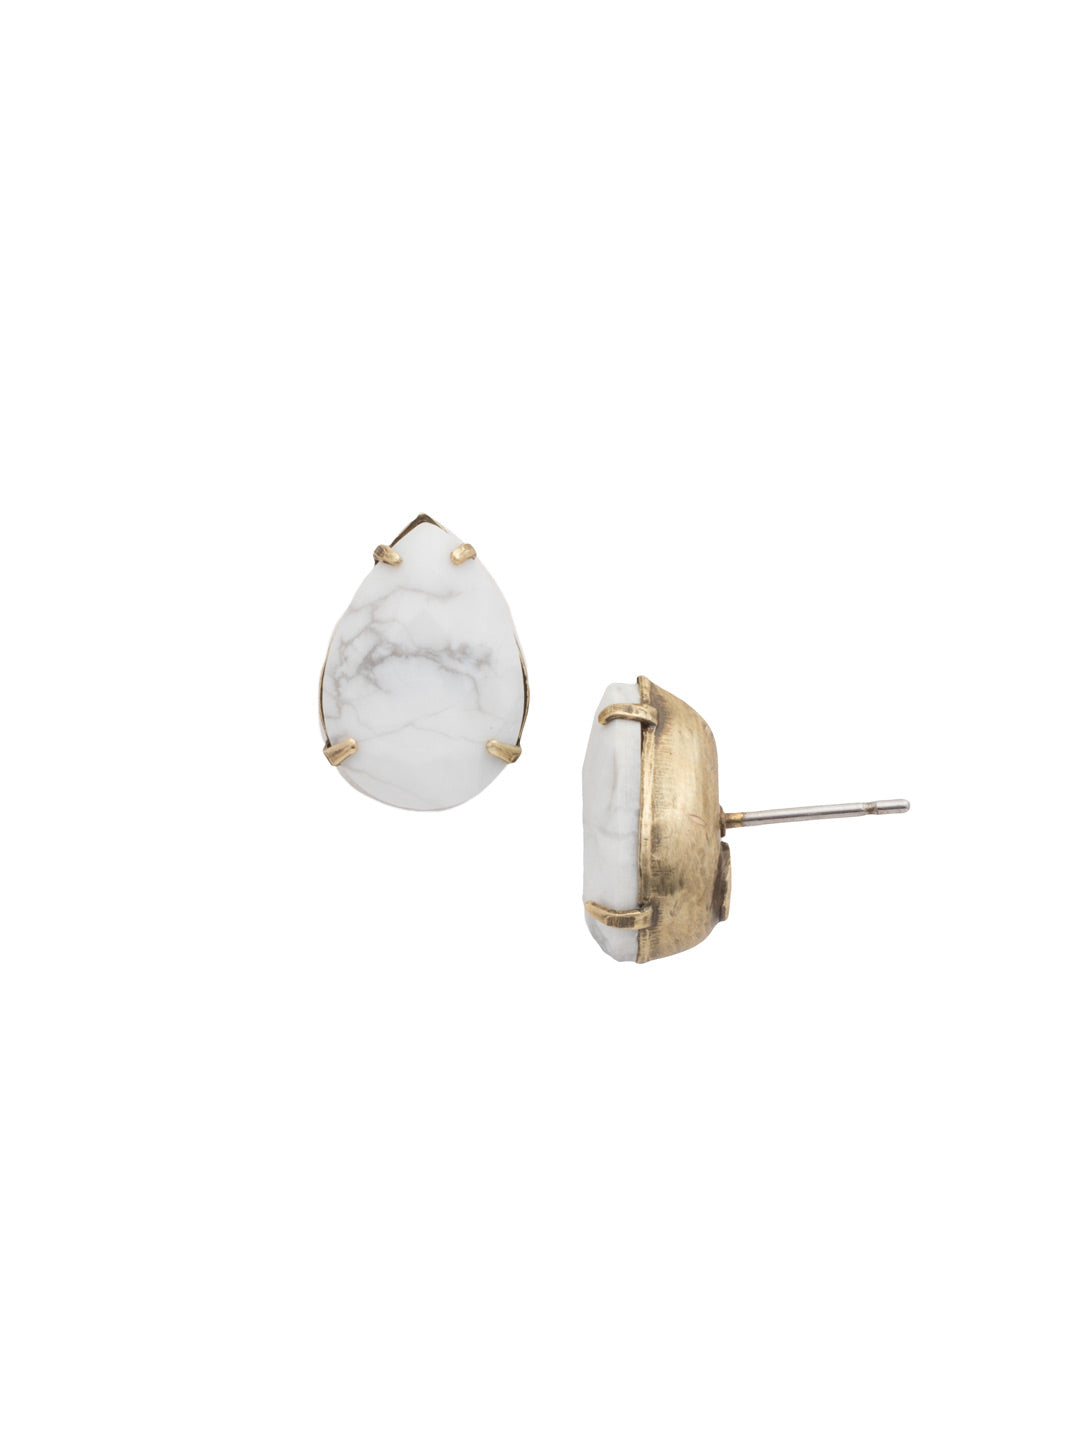 Ginnie Stud Earrings - ECR115AGPLU - <p>A beautiful basic stud. These classic single teardrop post earrings are perfect for any occasion, especially the everyday look. A timeless treasure that will sparkle season after season. From Sorrelli's Pearl Luster collection in our Antique Gold-tone finish.</p>